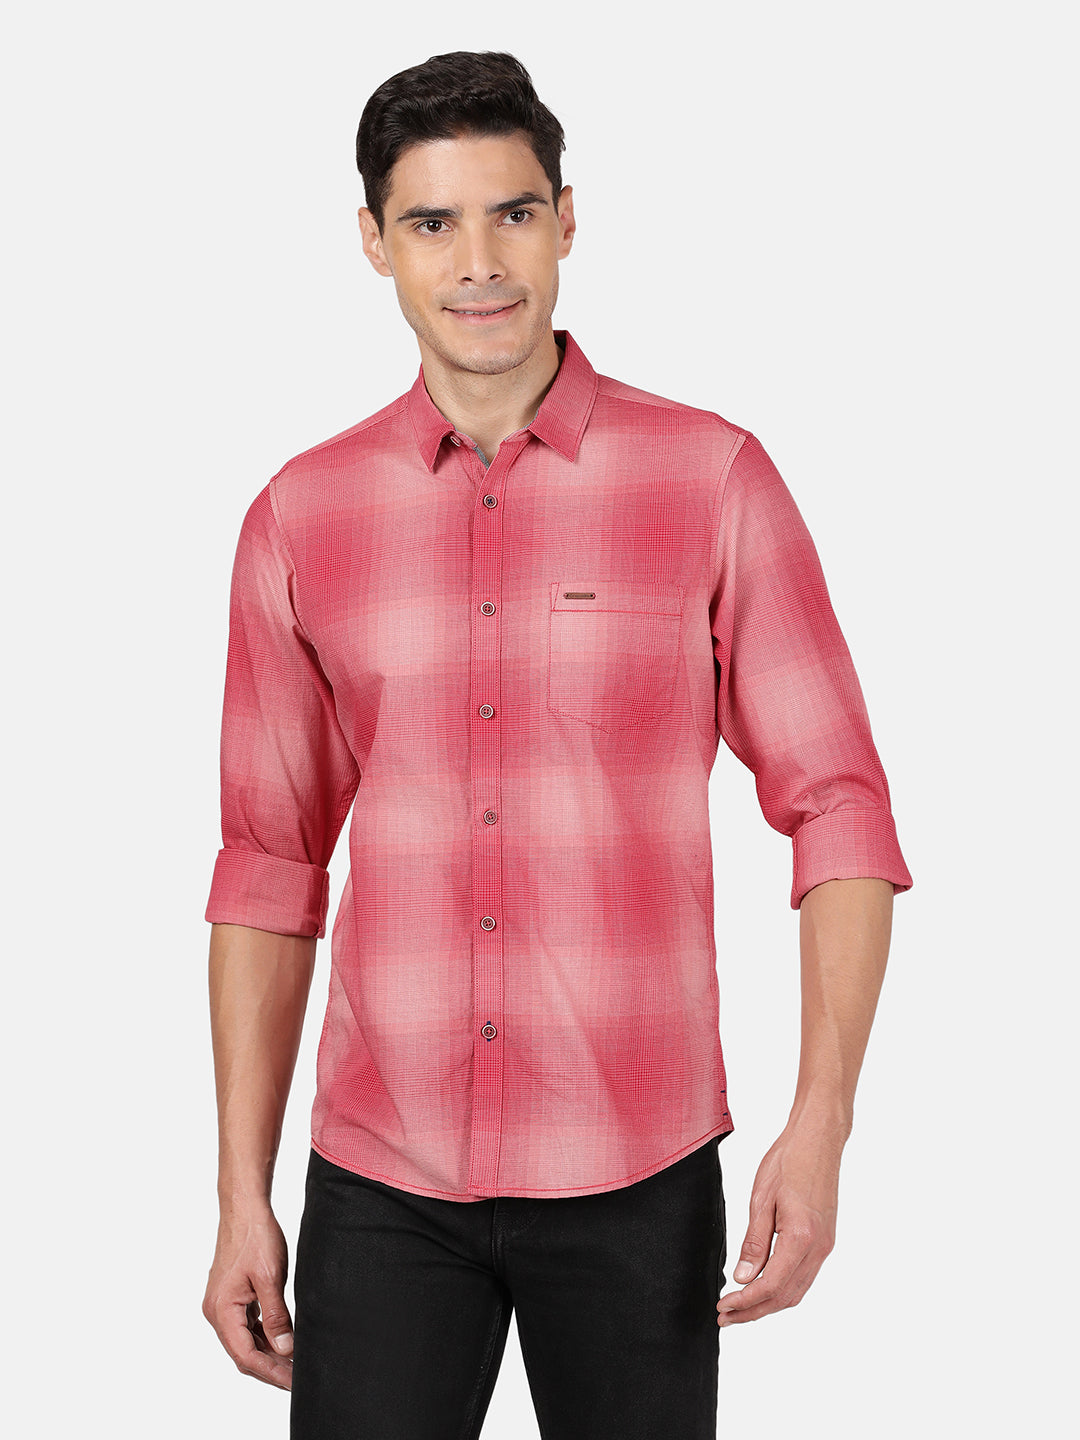 Crocodile Casual Full Sleeve Slim Fit Checks Red with Collar Shirt for Men